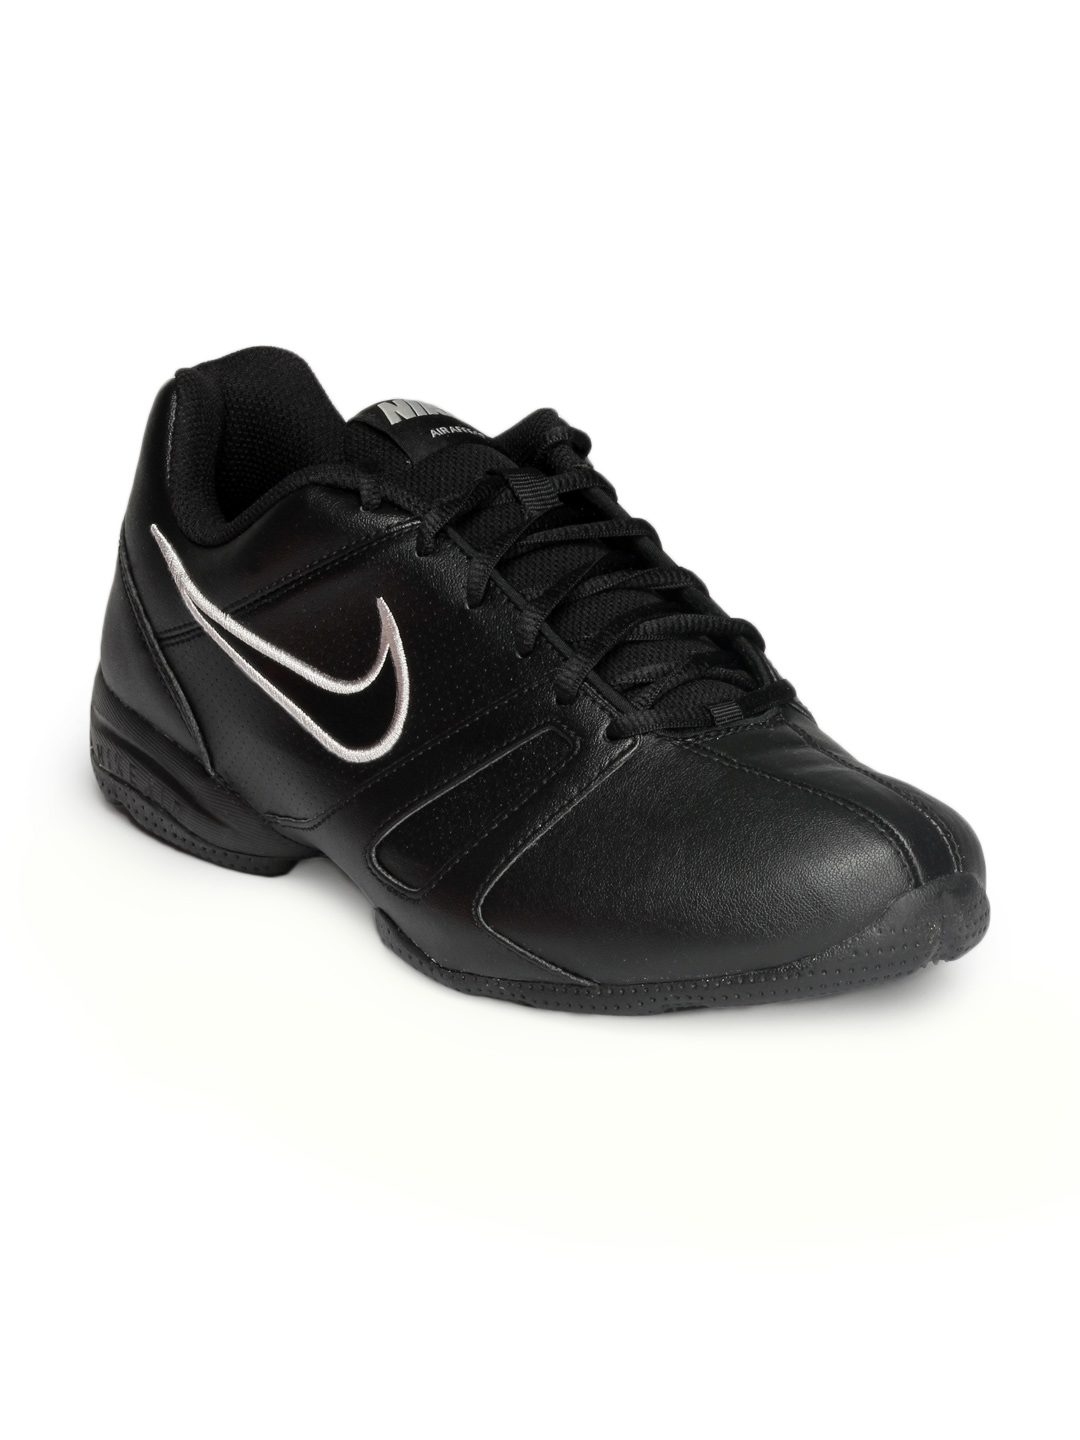 Buy Nike Men Black Air Affect Shoes - Casual Shoes for Men 39633 | Myntra